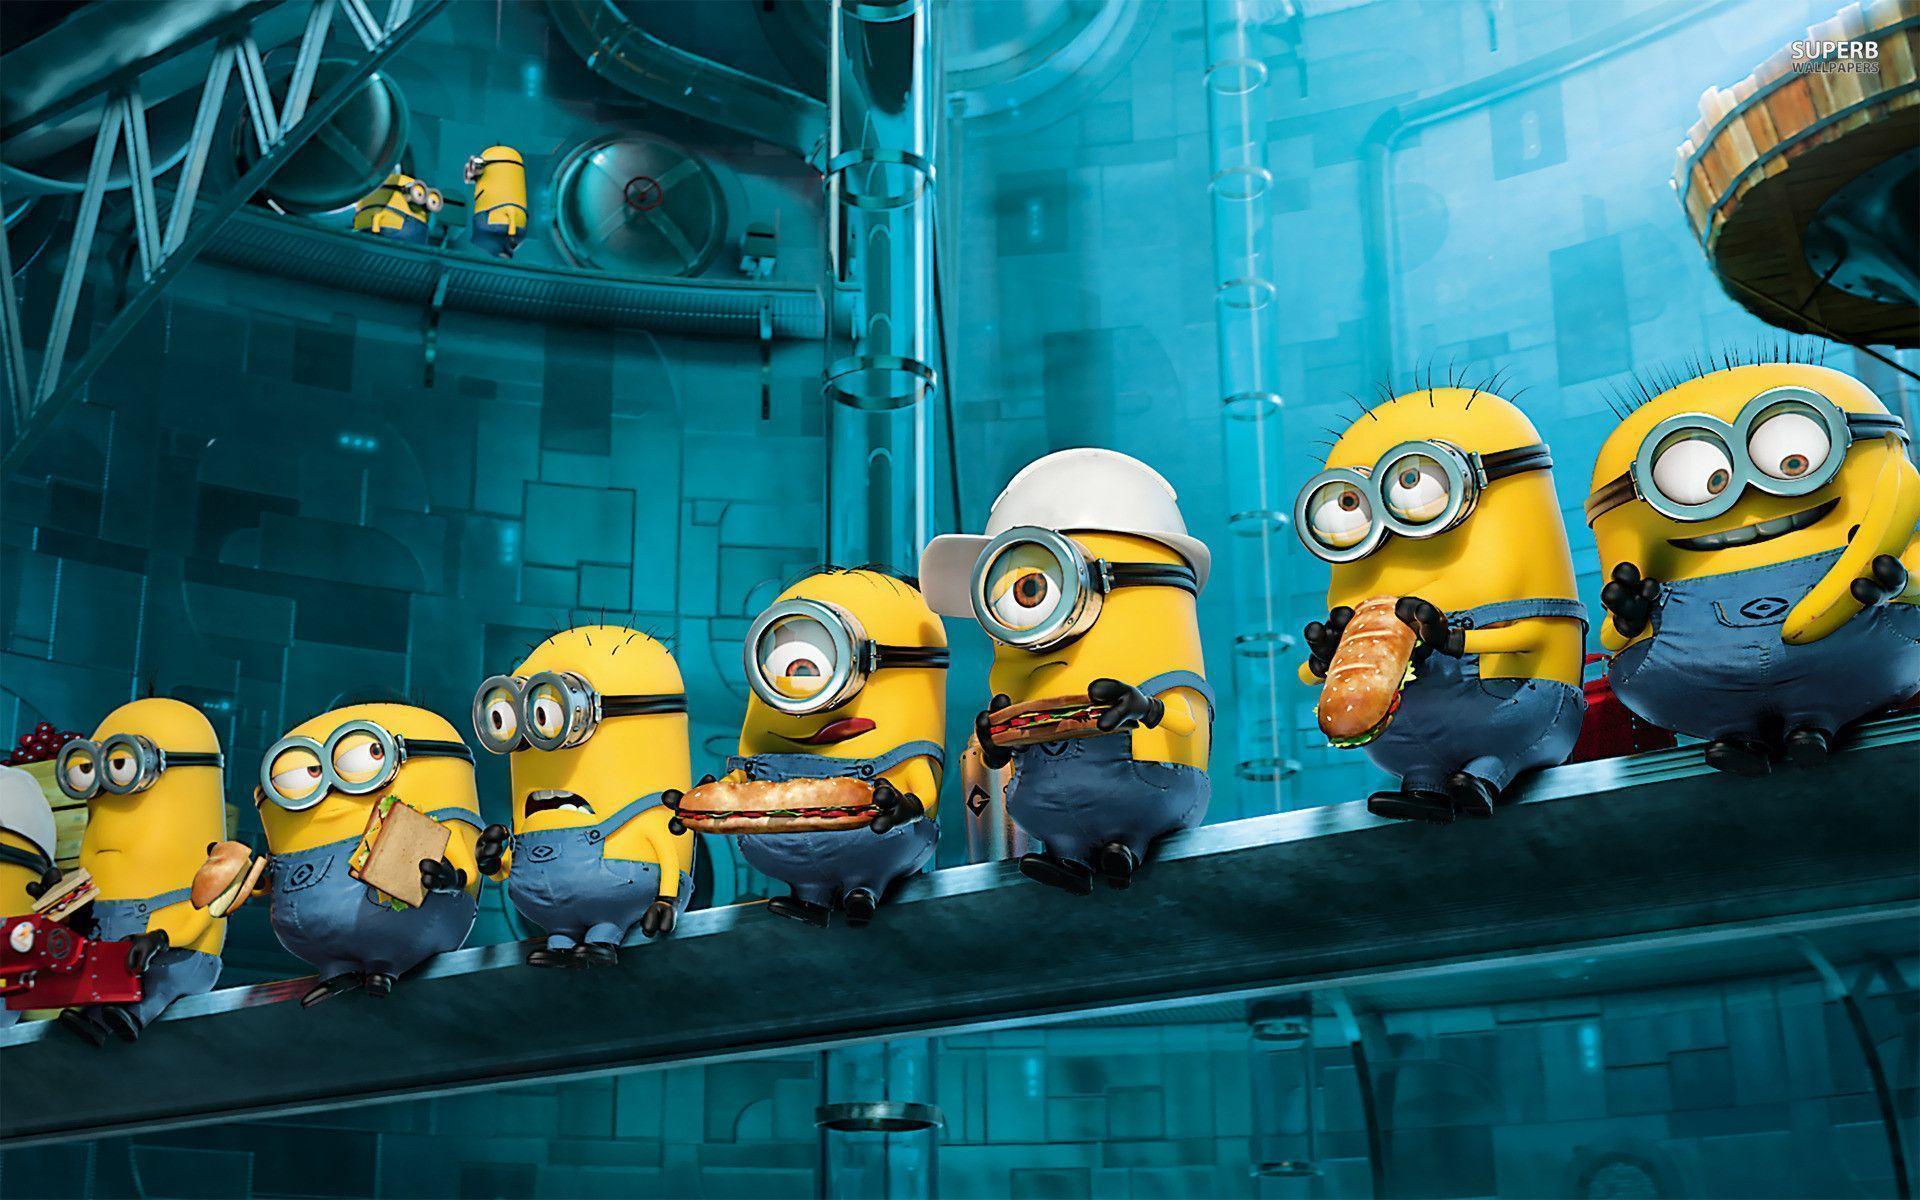 Minion Coffee Time Wallpapers